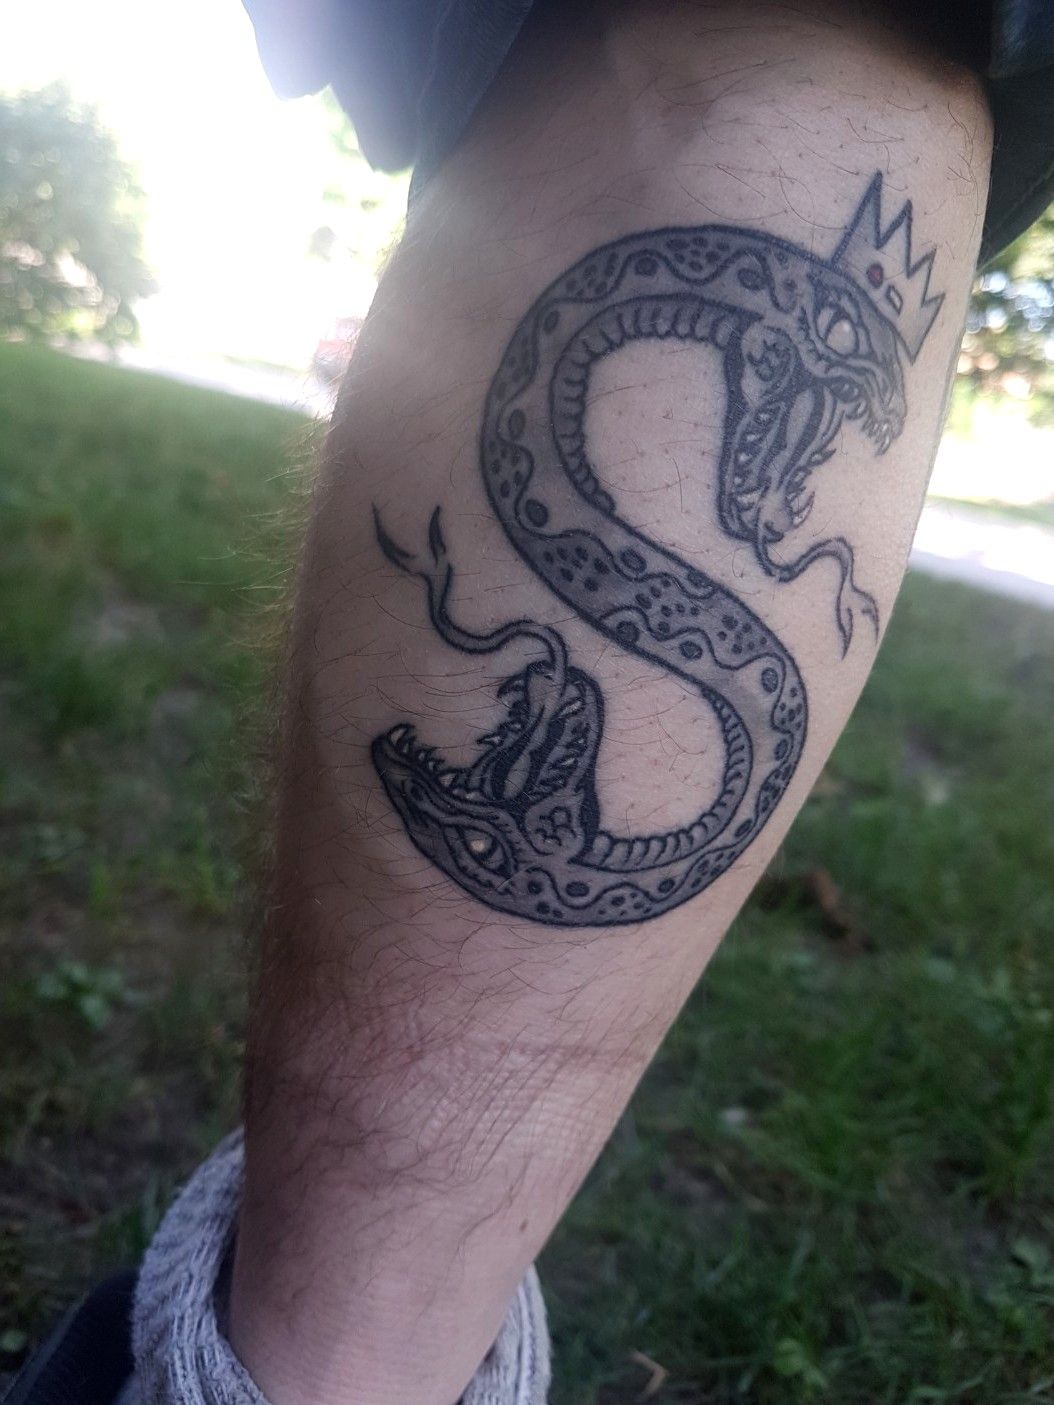 Discover 80 south side serpents tattoo best  thtantai2